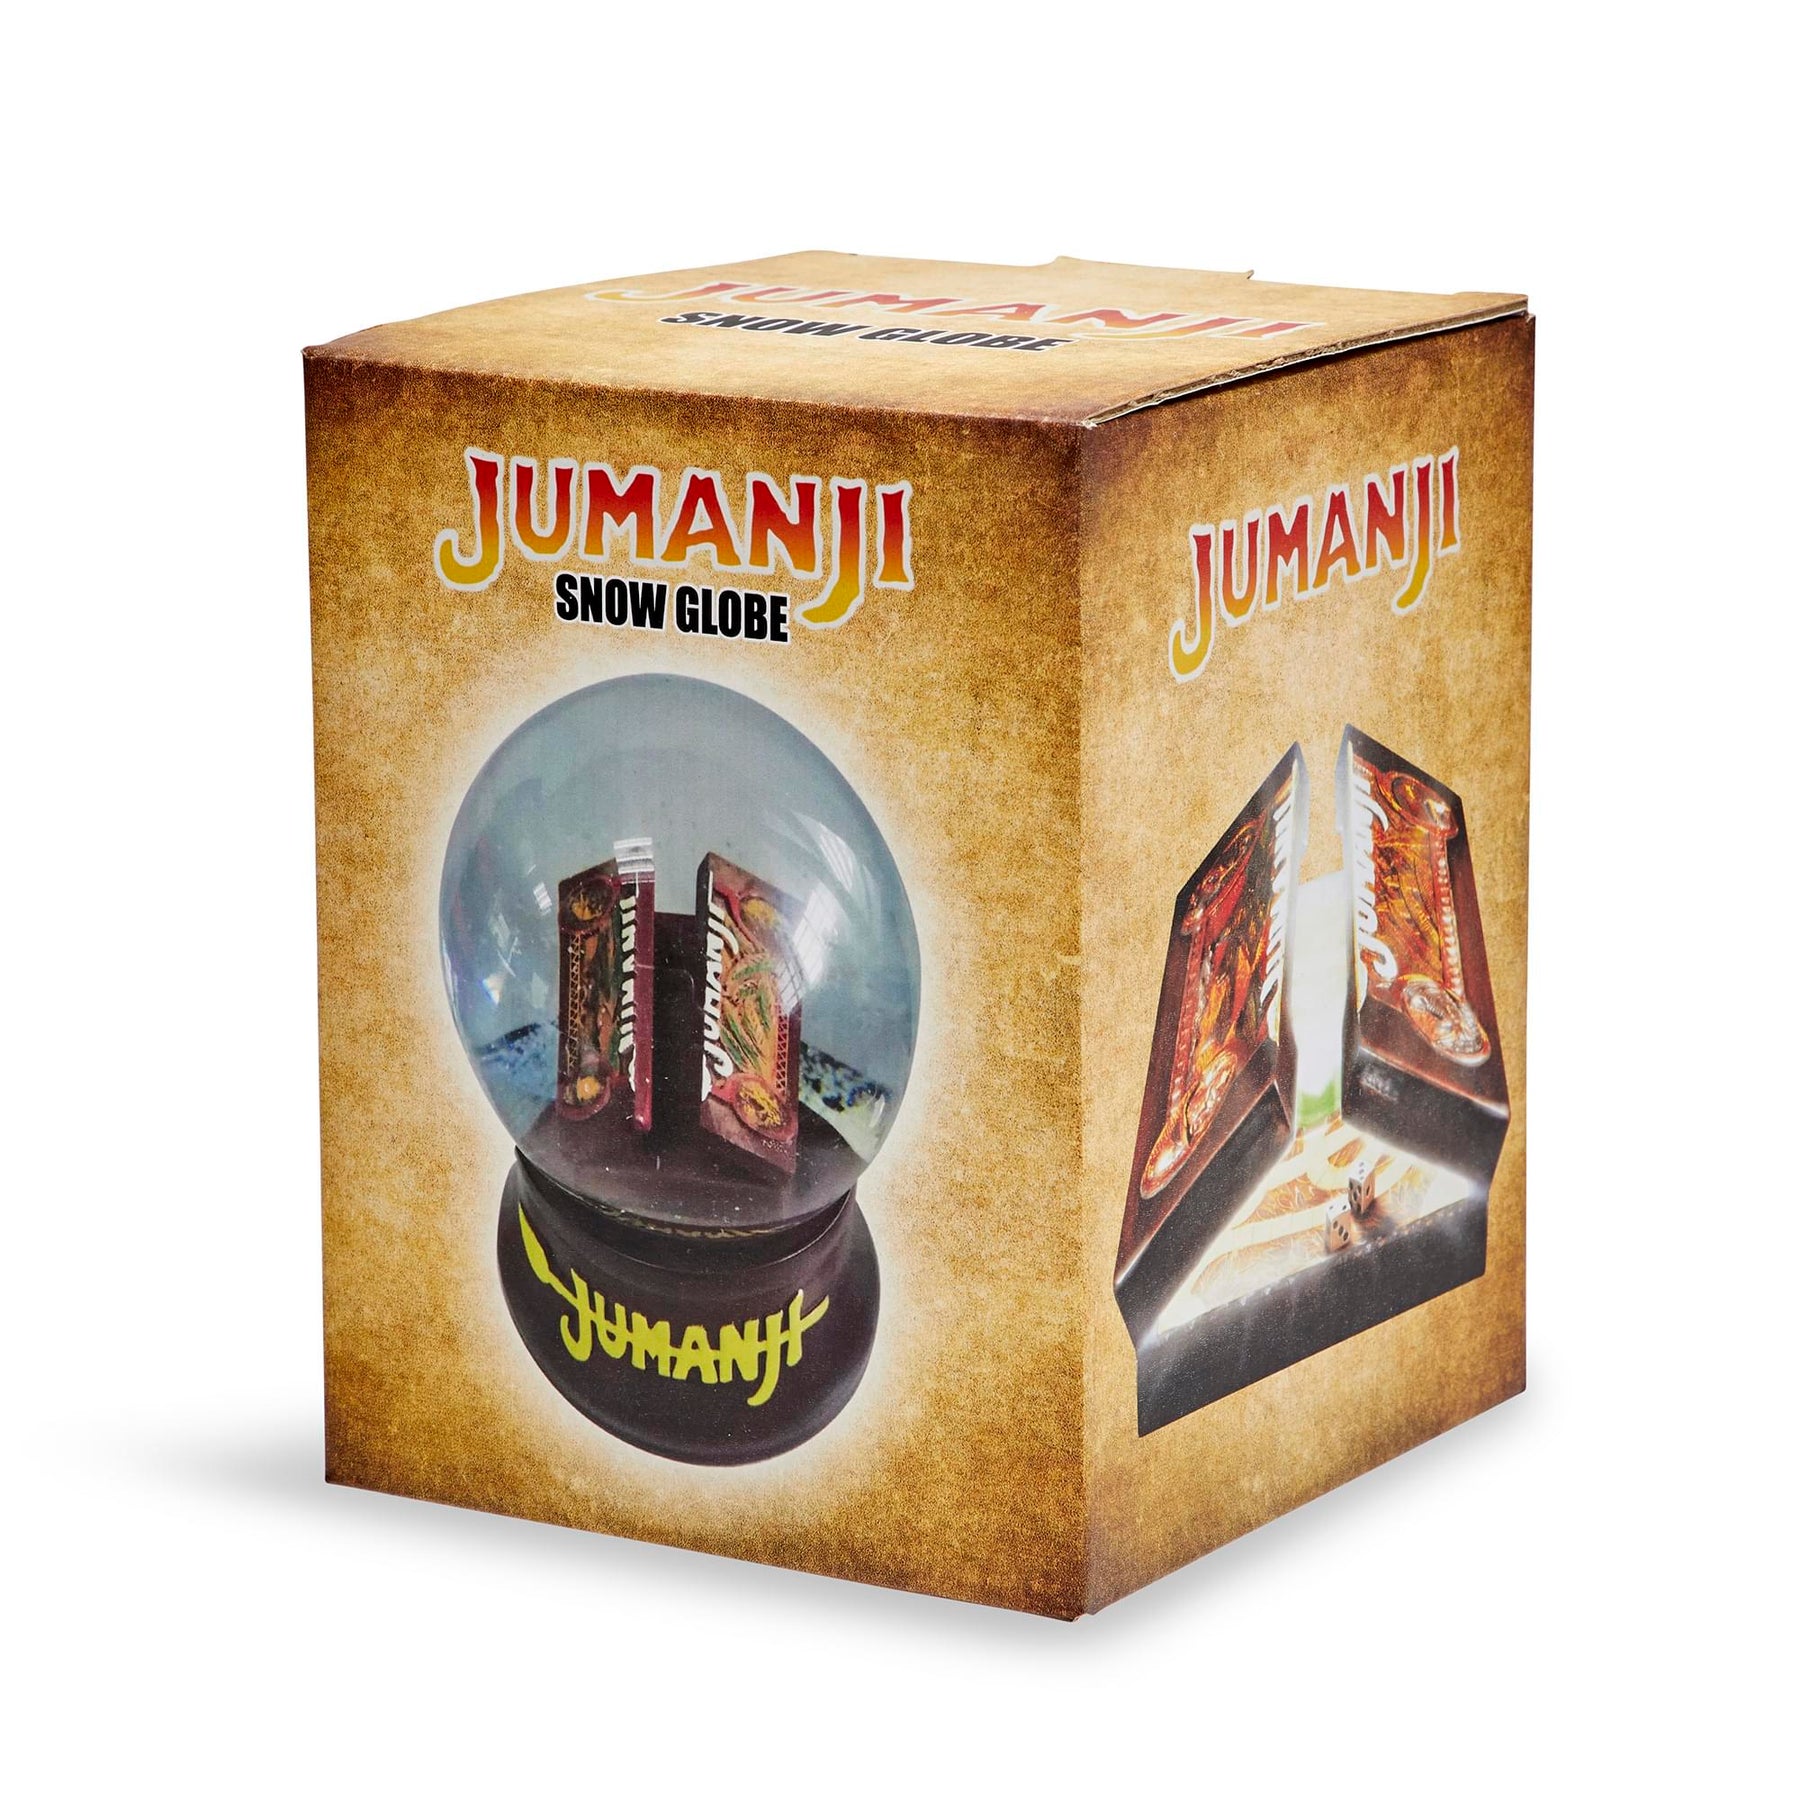 Jumanji Classic Board Game Collectible Snow Globe Gift | Measures 5 x 4 Inches